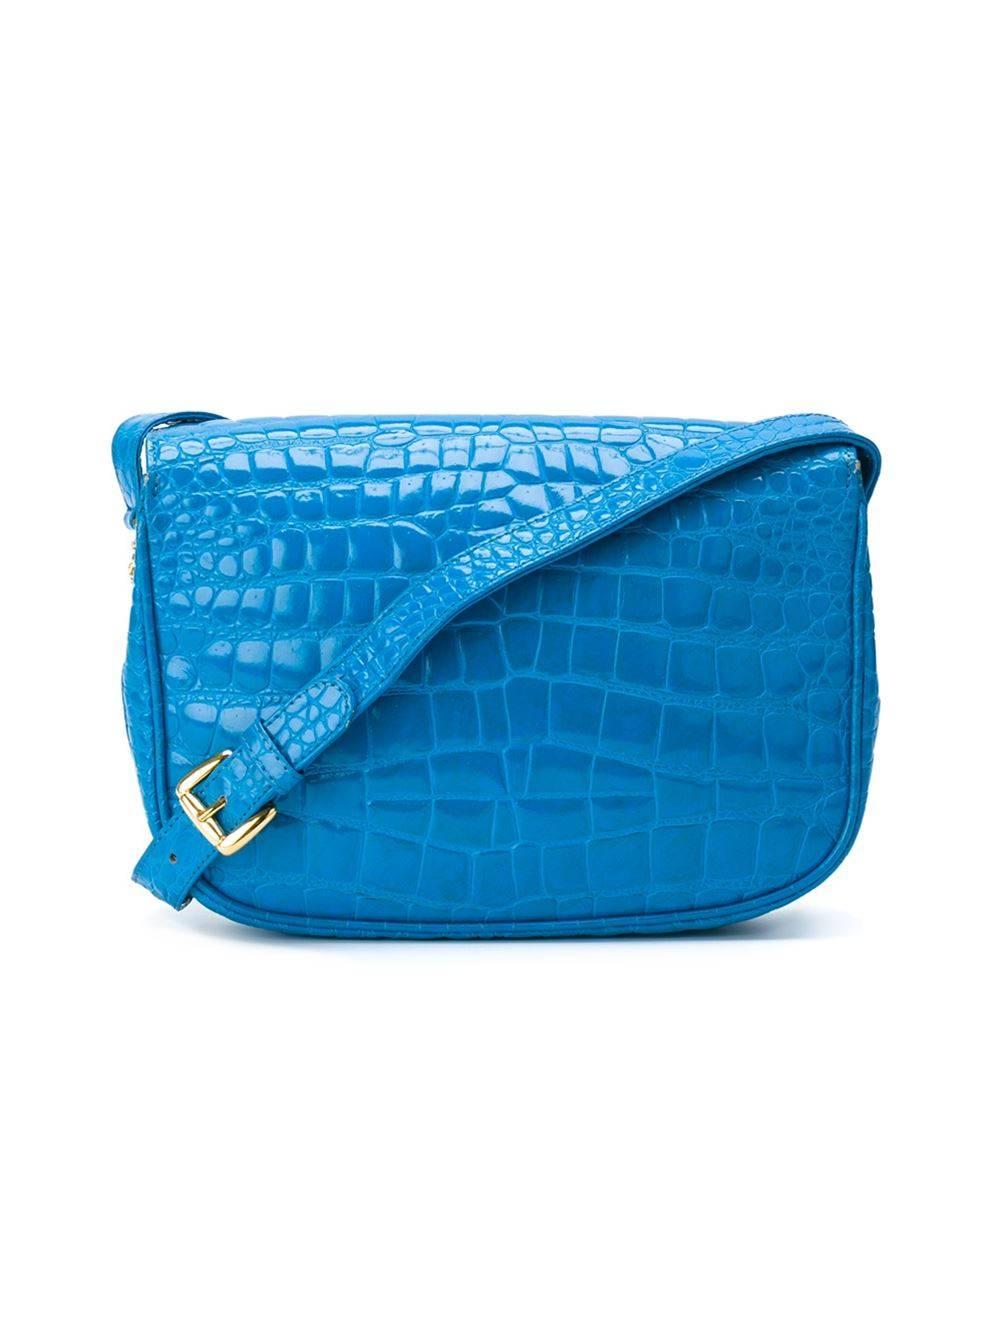 Blue and gold-tone crocodile leather flap shoulder bag from Gianni Versace featuring a foldover top with magnetic closure and an adjustable shoulder strap. Internal zipped pocket and an internal logo patch.

Please note that this item cannot be